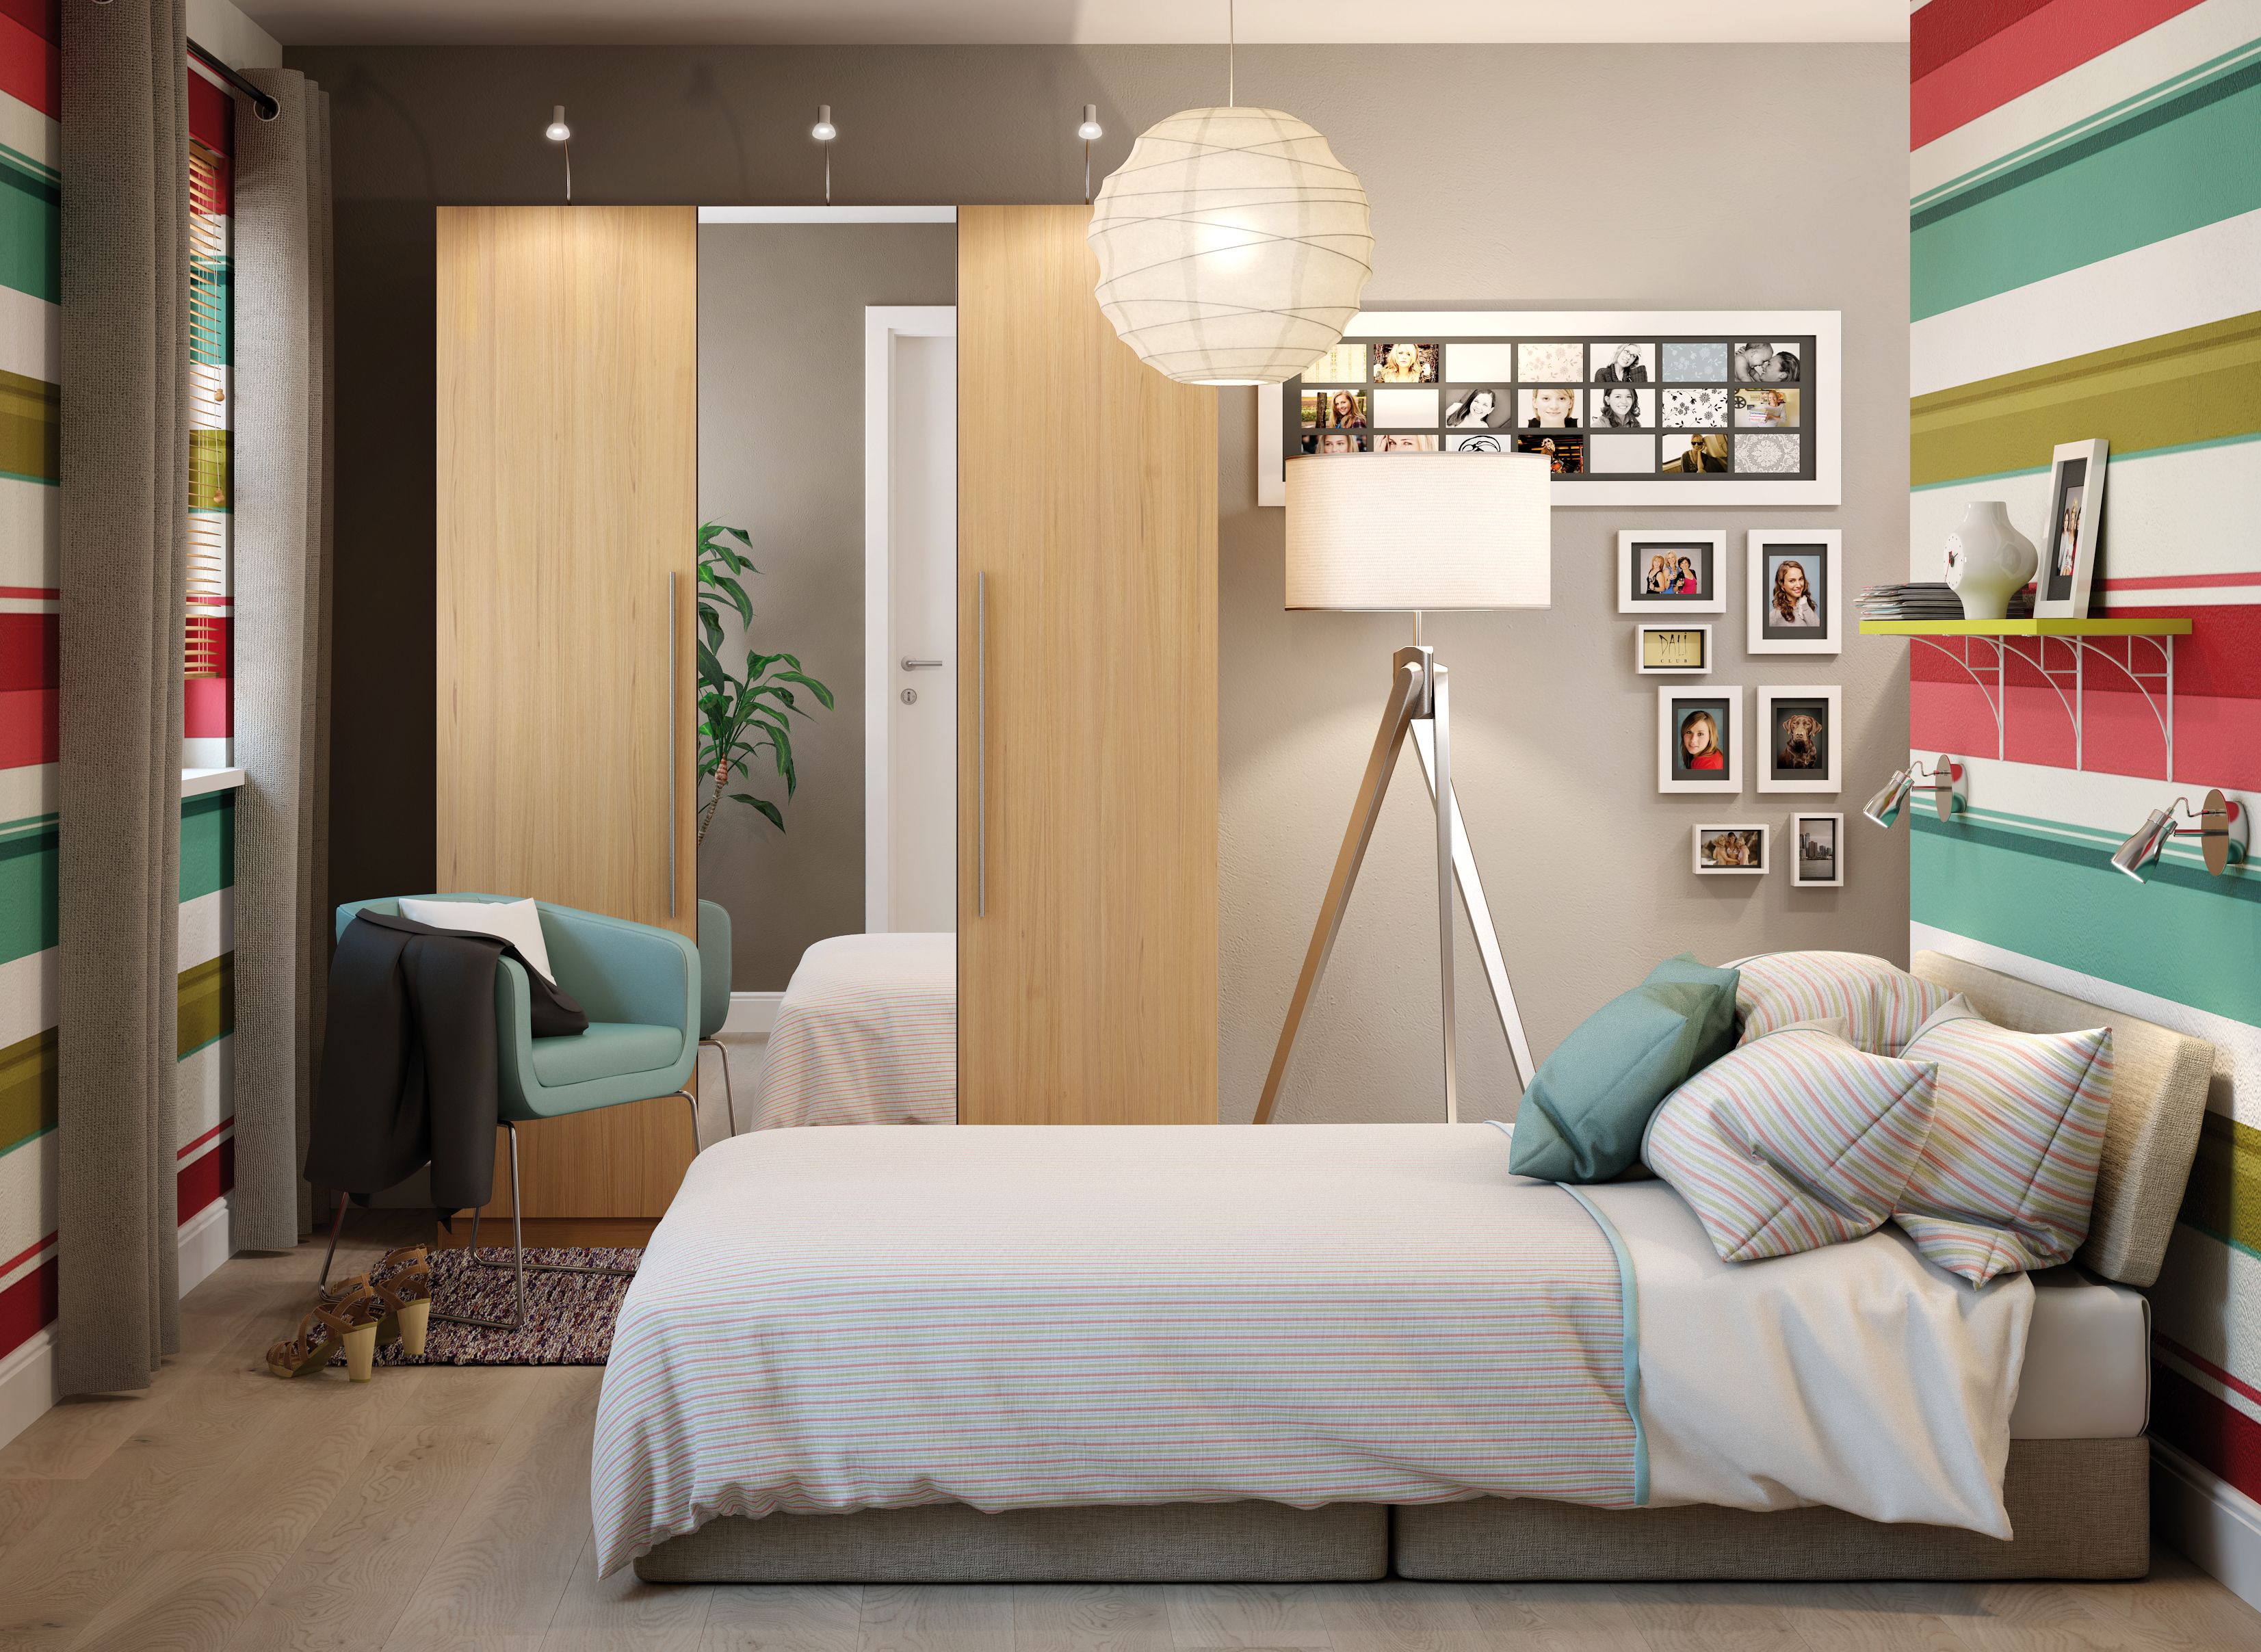 7 steps to planning a new bedroom | Ideas &amp; Advice | DIY 